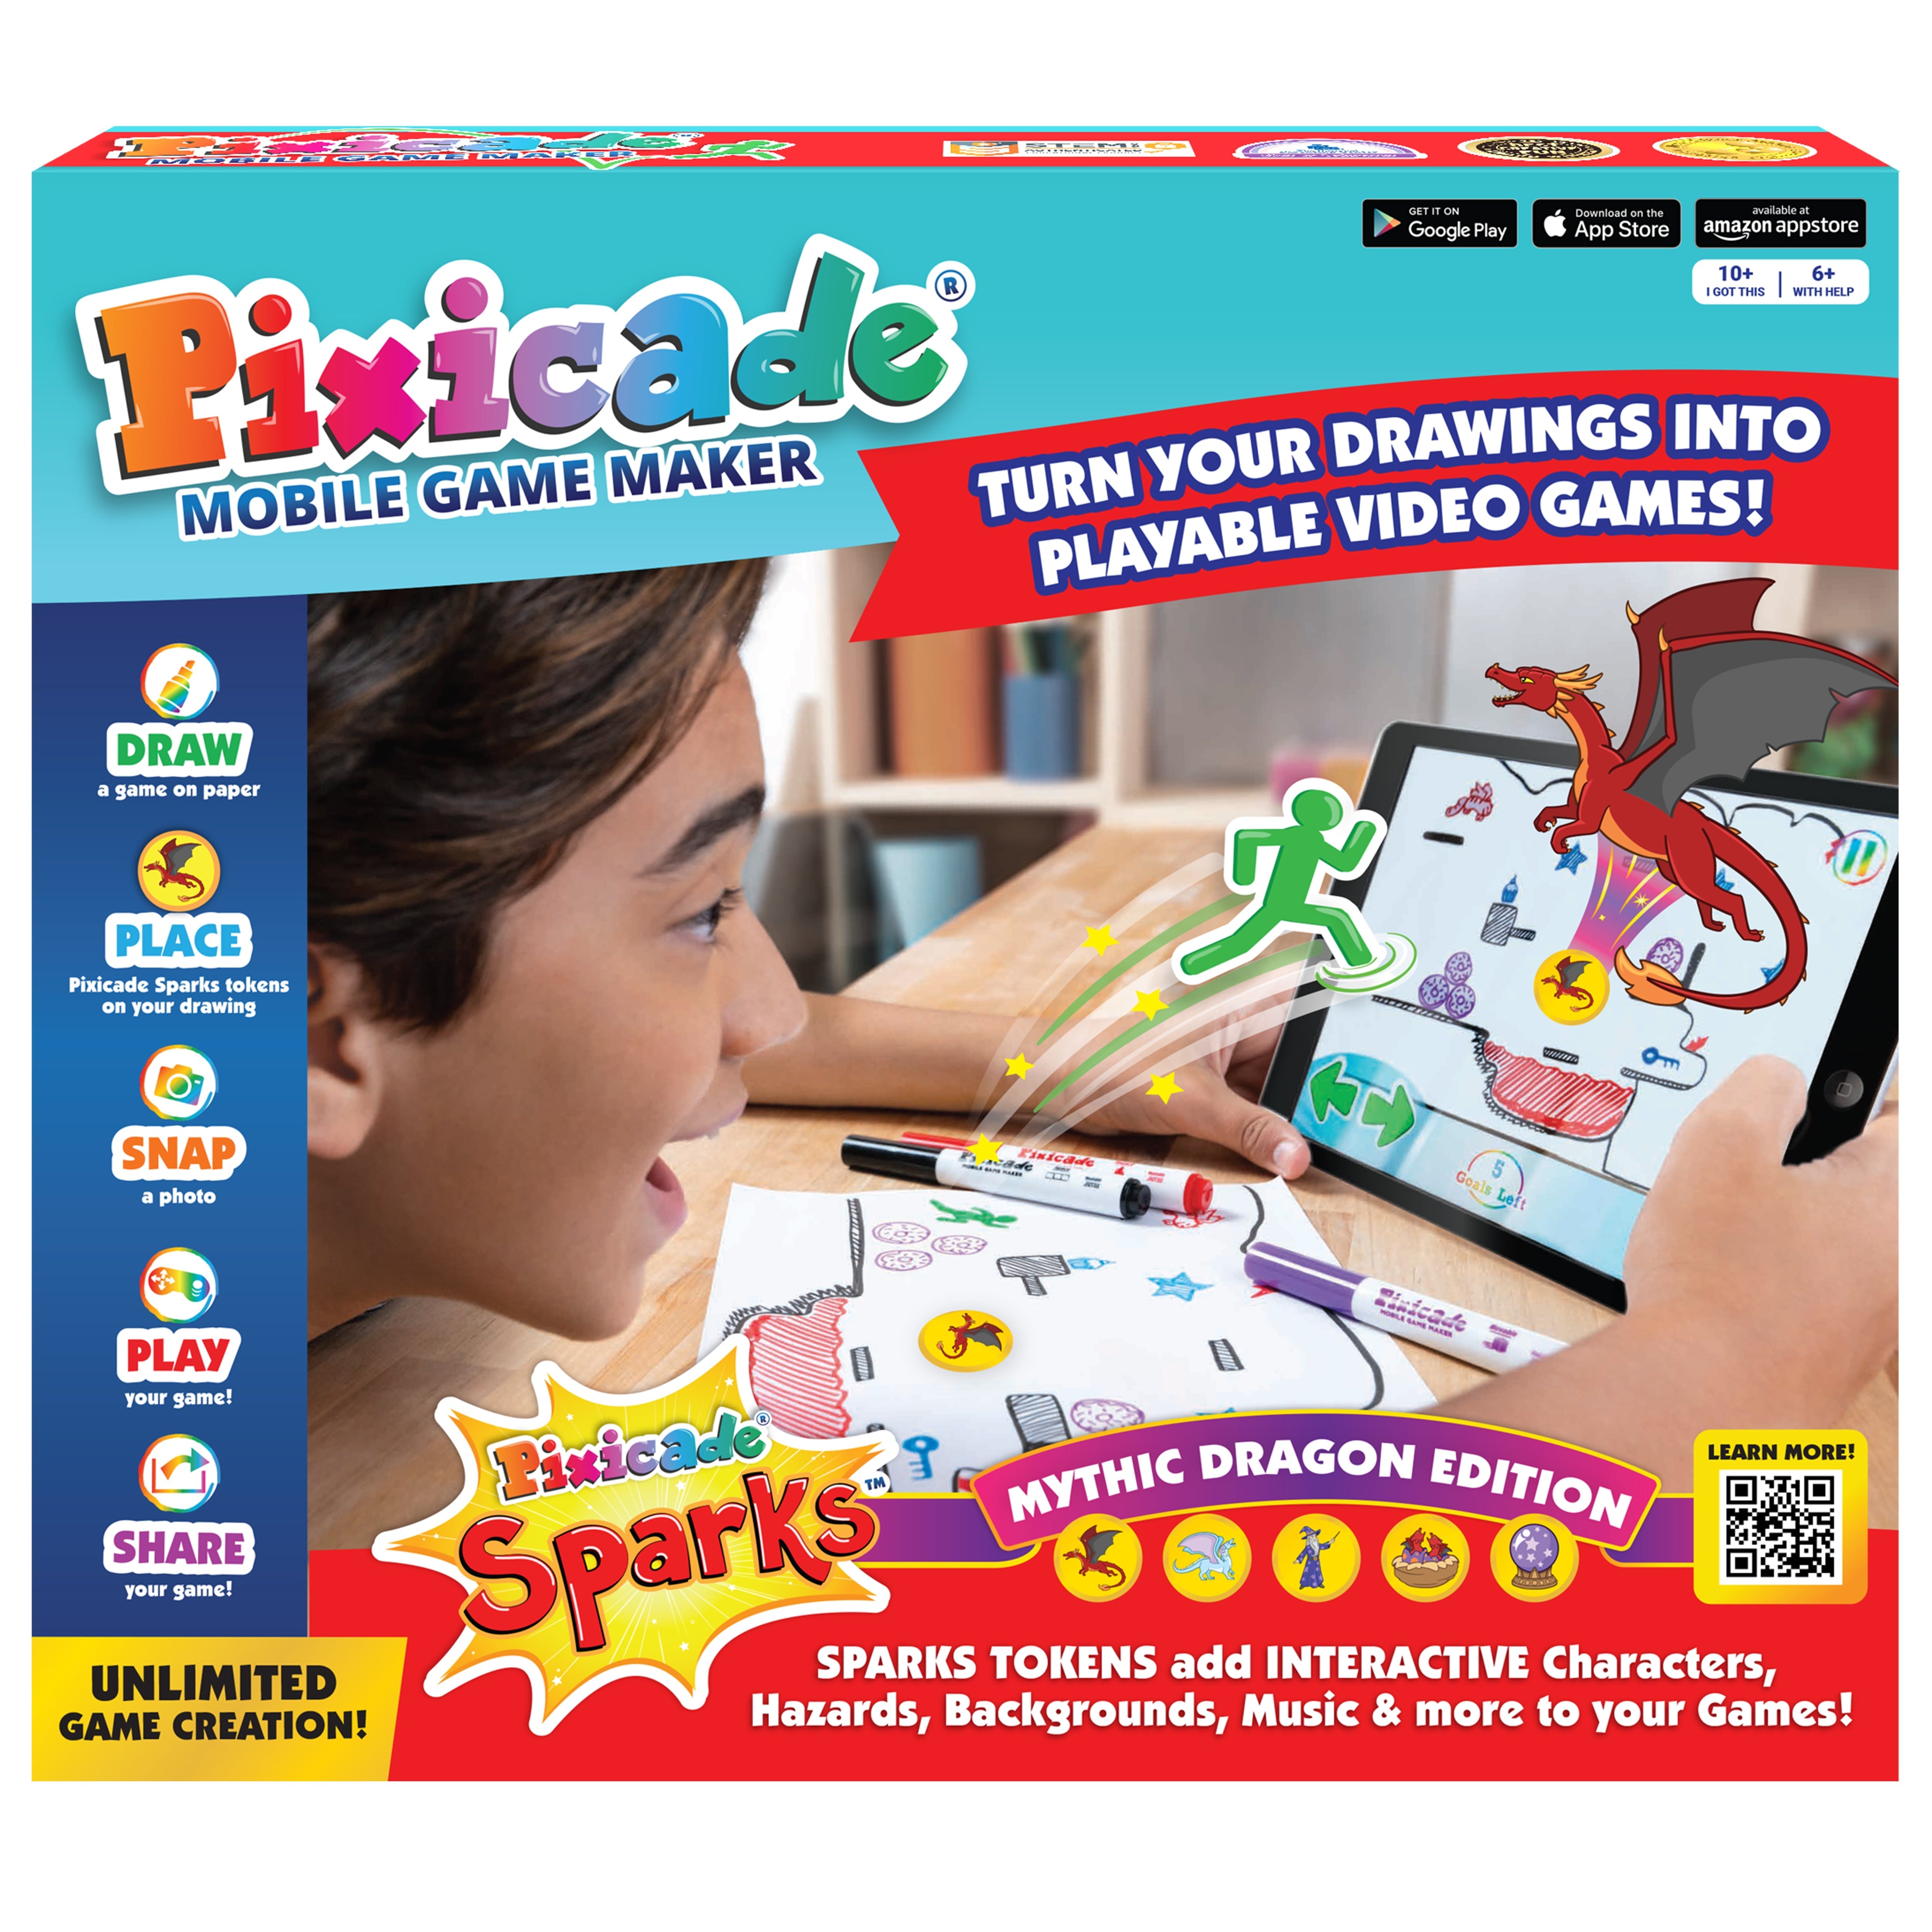 Pixicade Plus Interactive Mobile Game Maker - 20034190, HSN